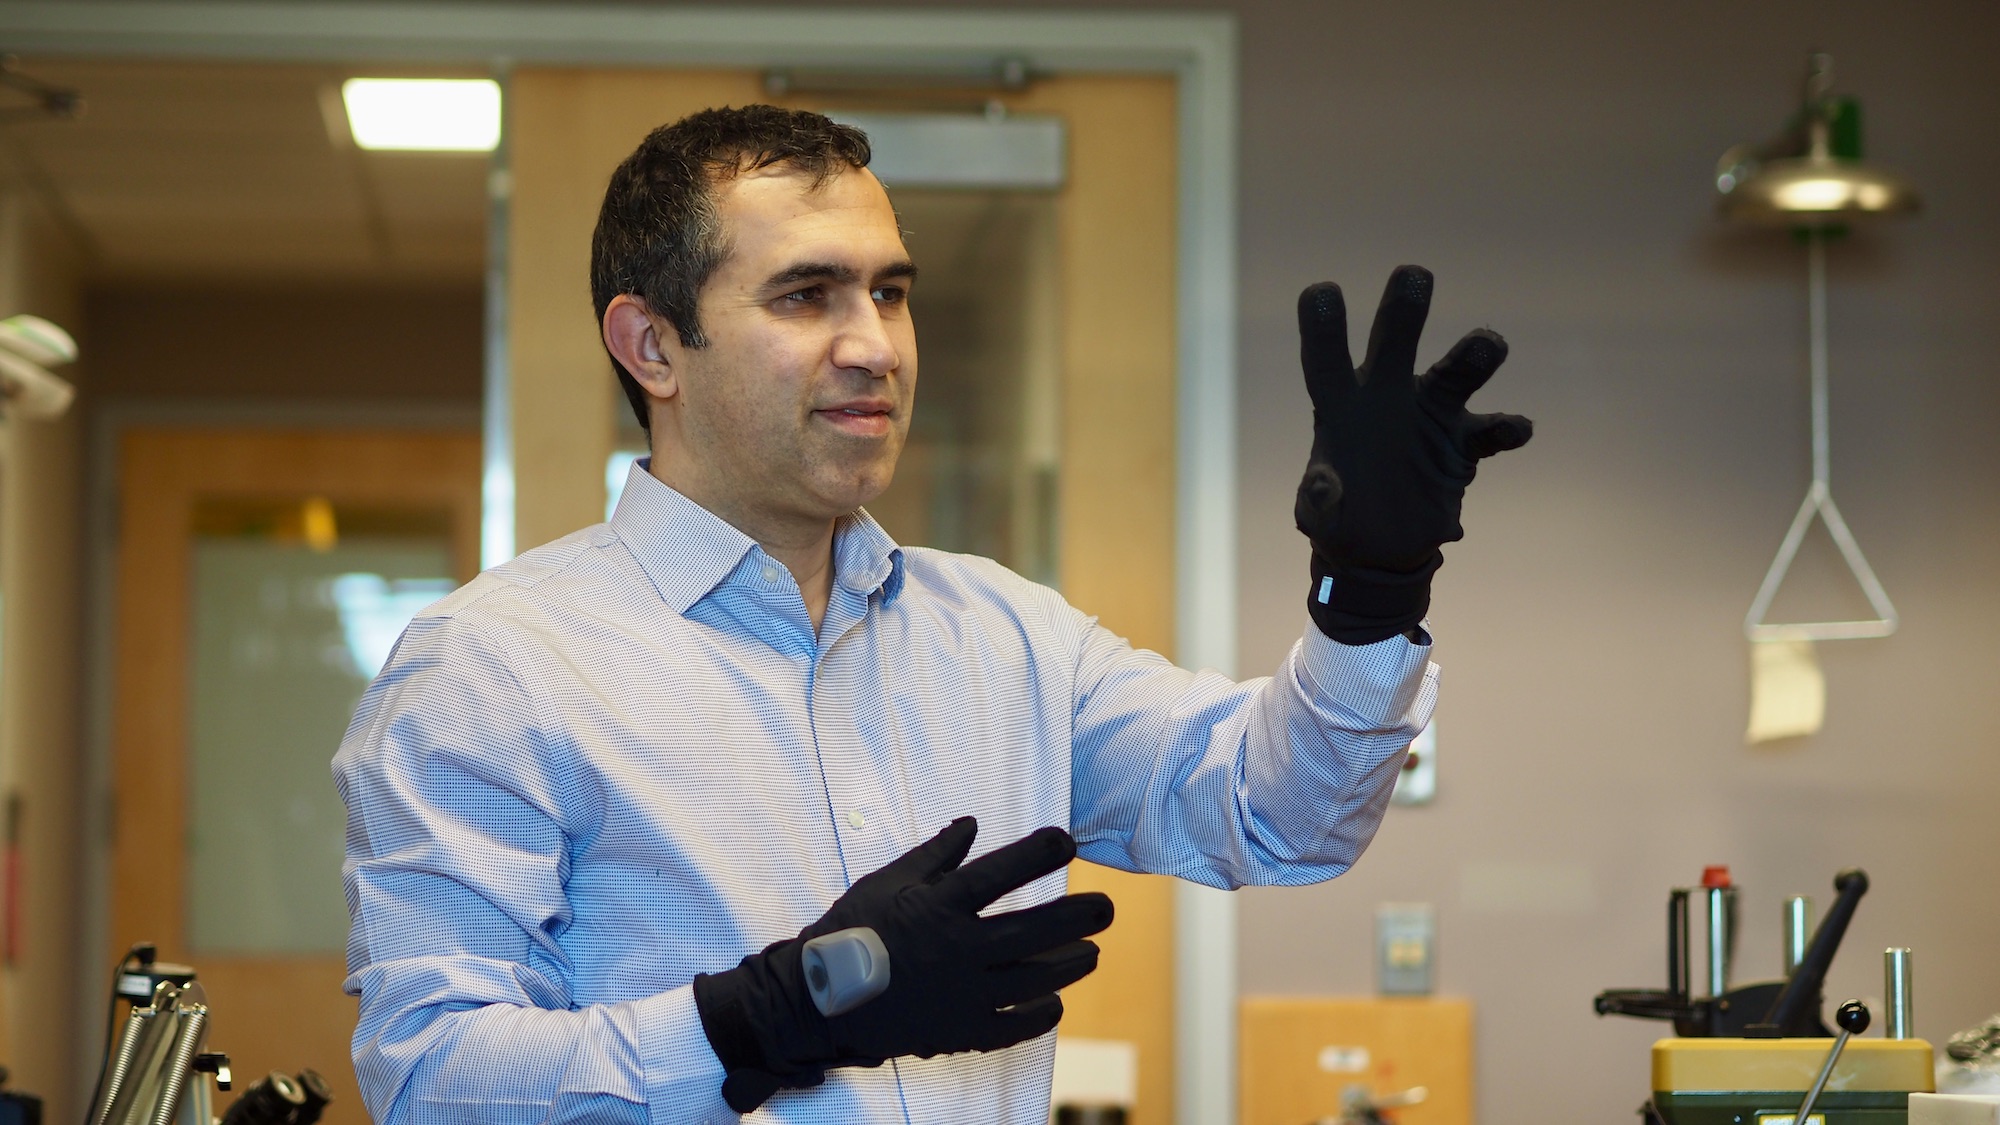 The smart glove is stretchy, w [IMAGE]